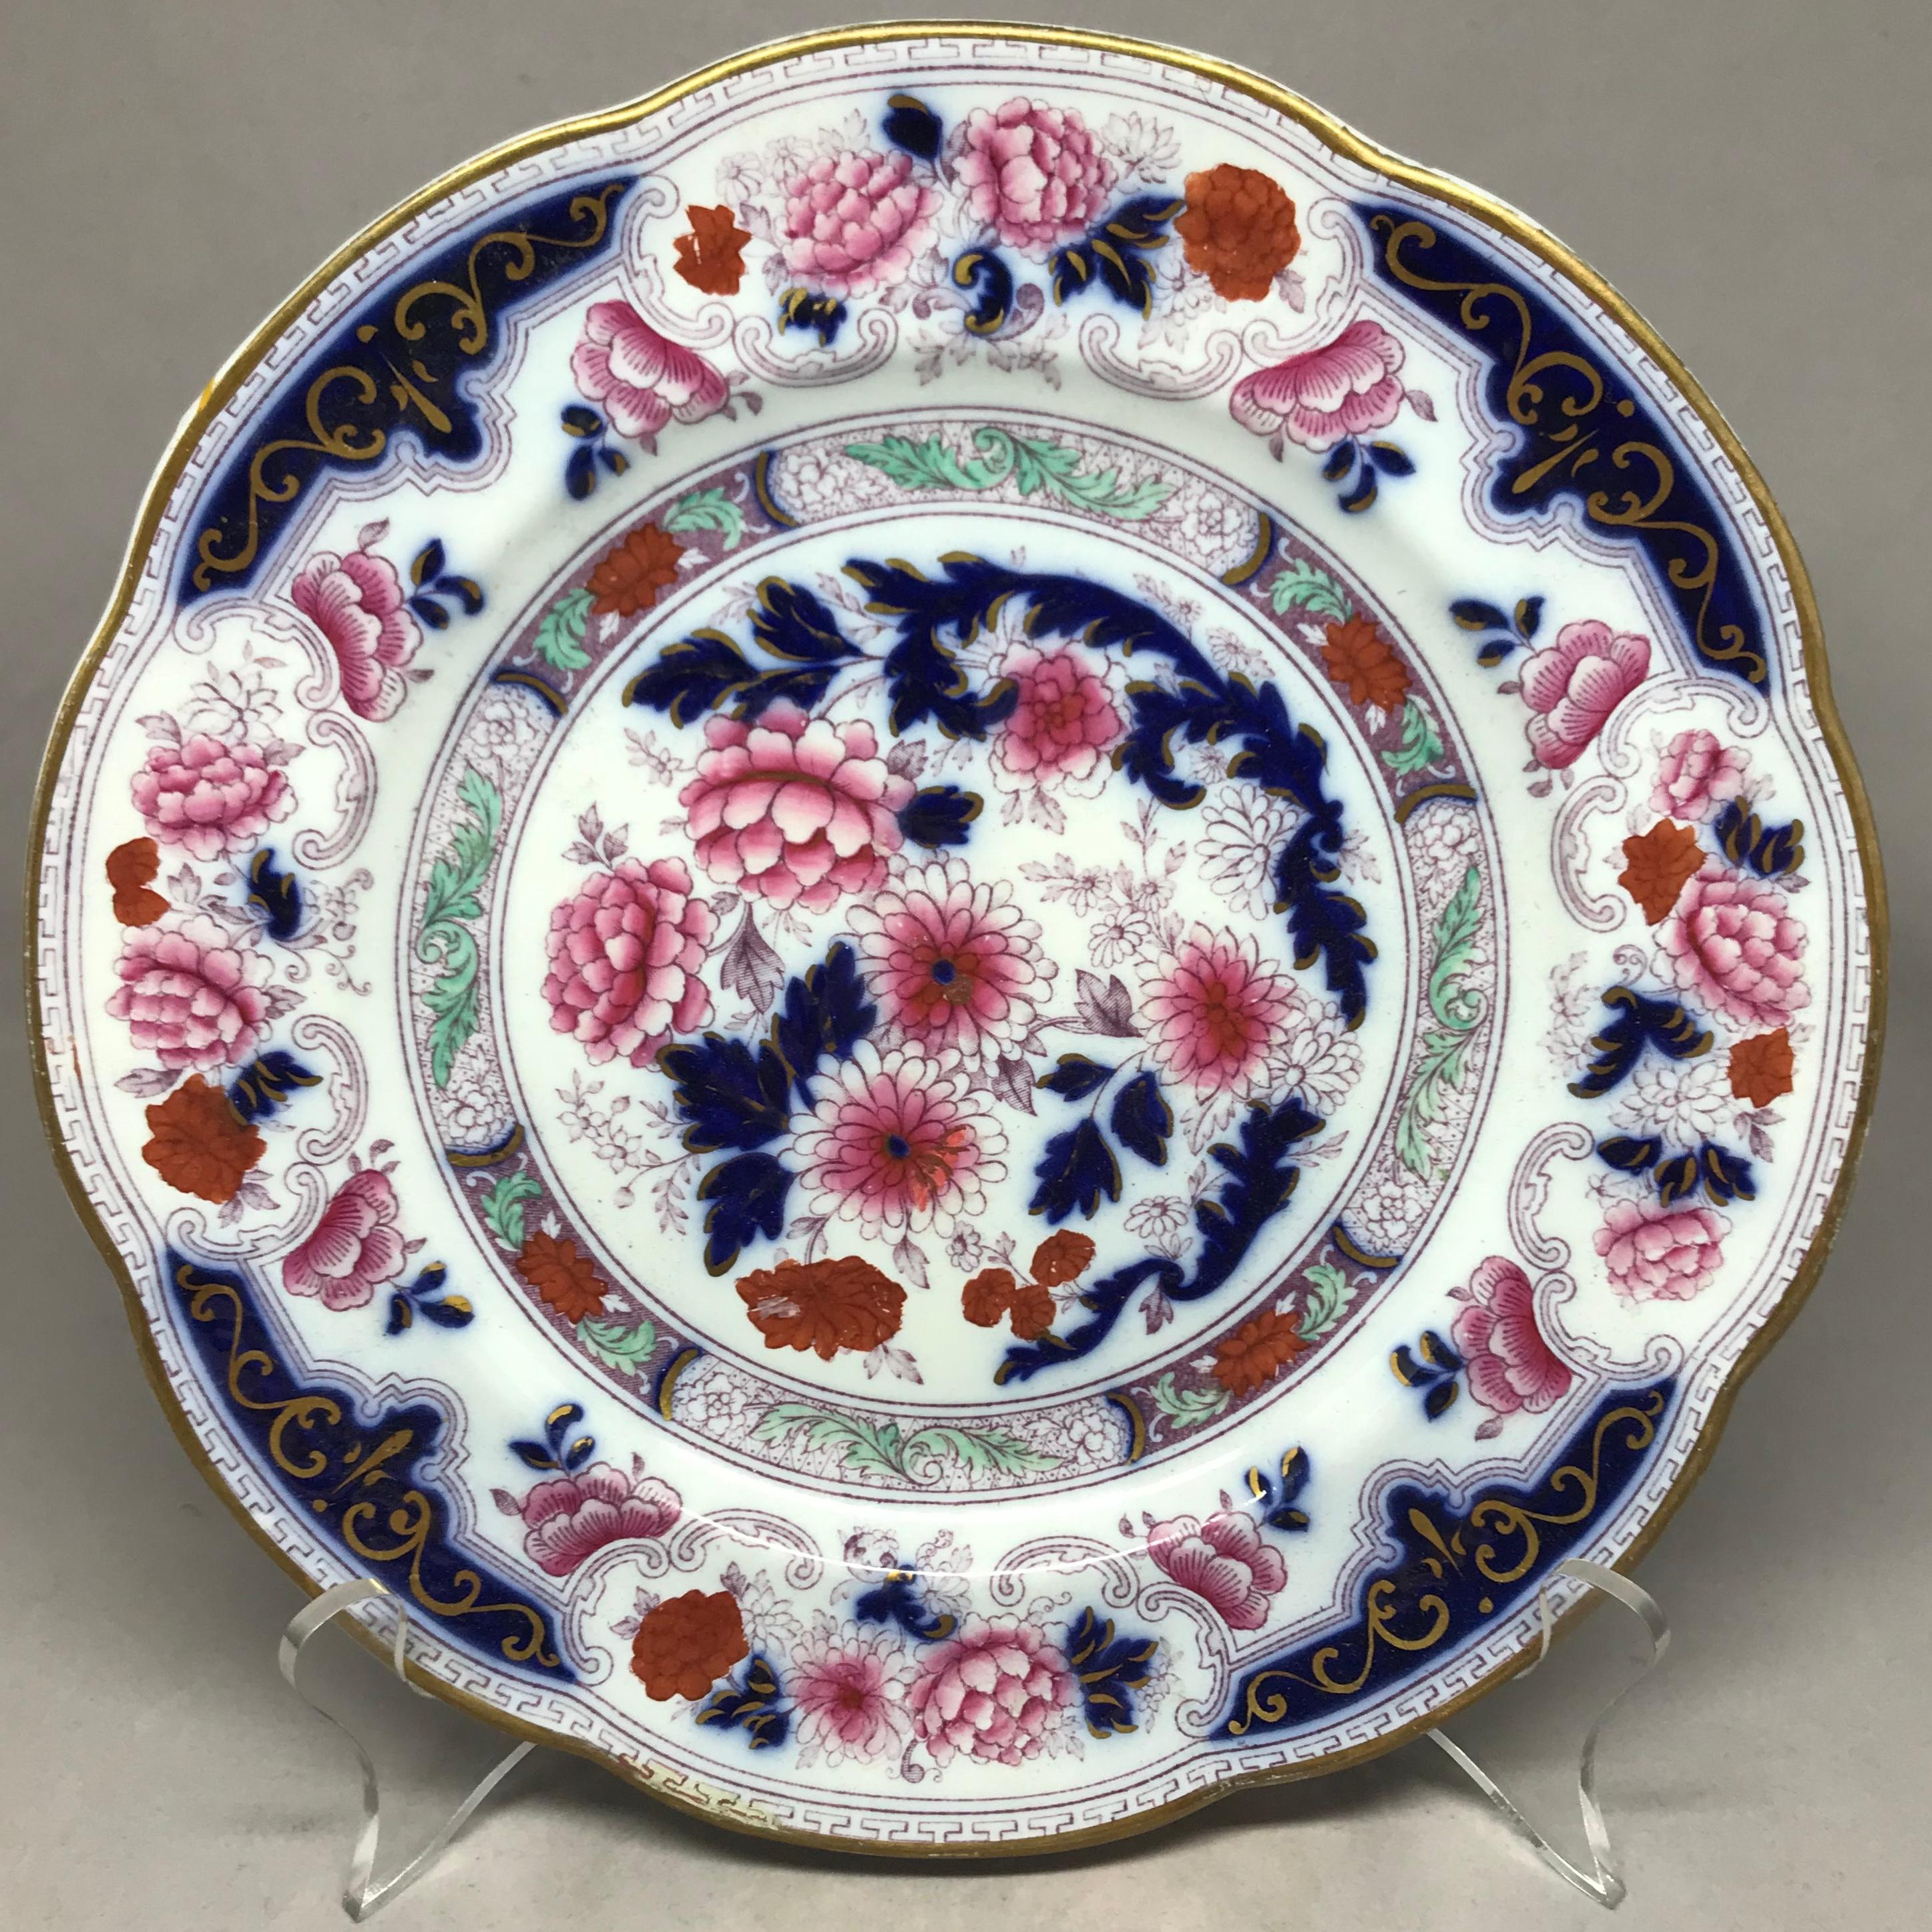 Set of six gilt Imari plates. Six English Imari decorated plates in blue, violet, rose and orange with gilt highlights and lobed rims with gilt Greek key band, with underglaze and impressed markings for Cauldon. England, late 19th